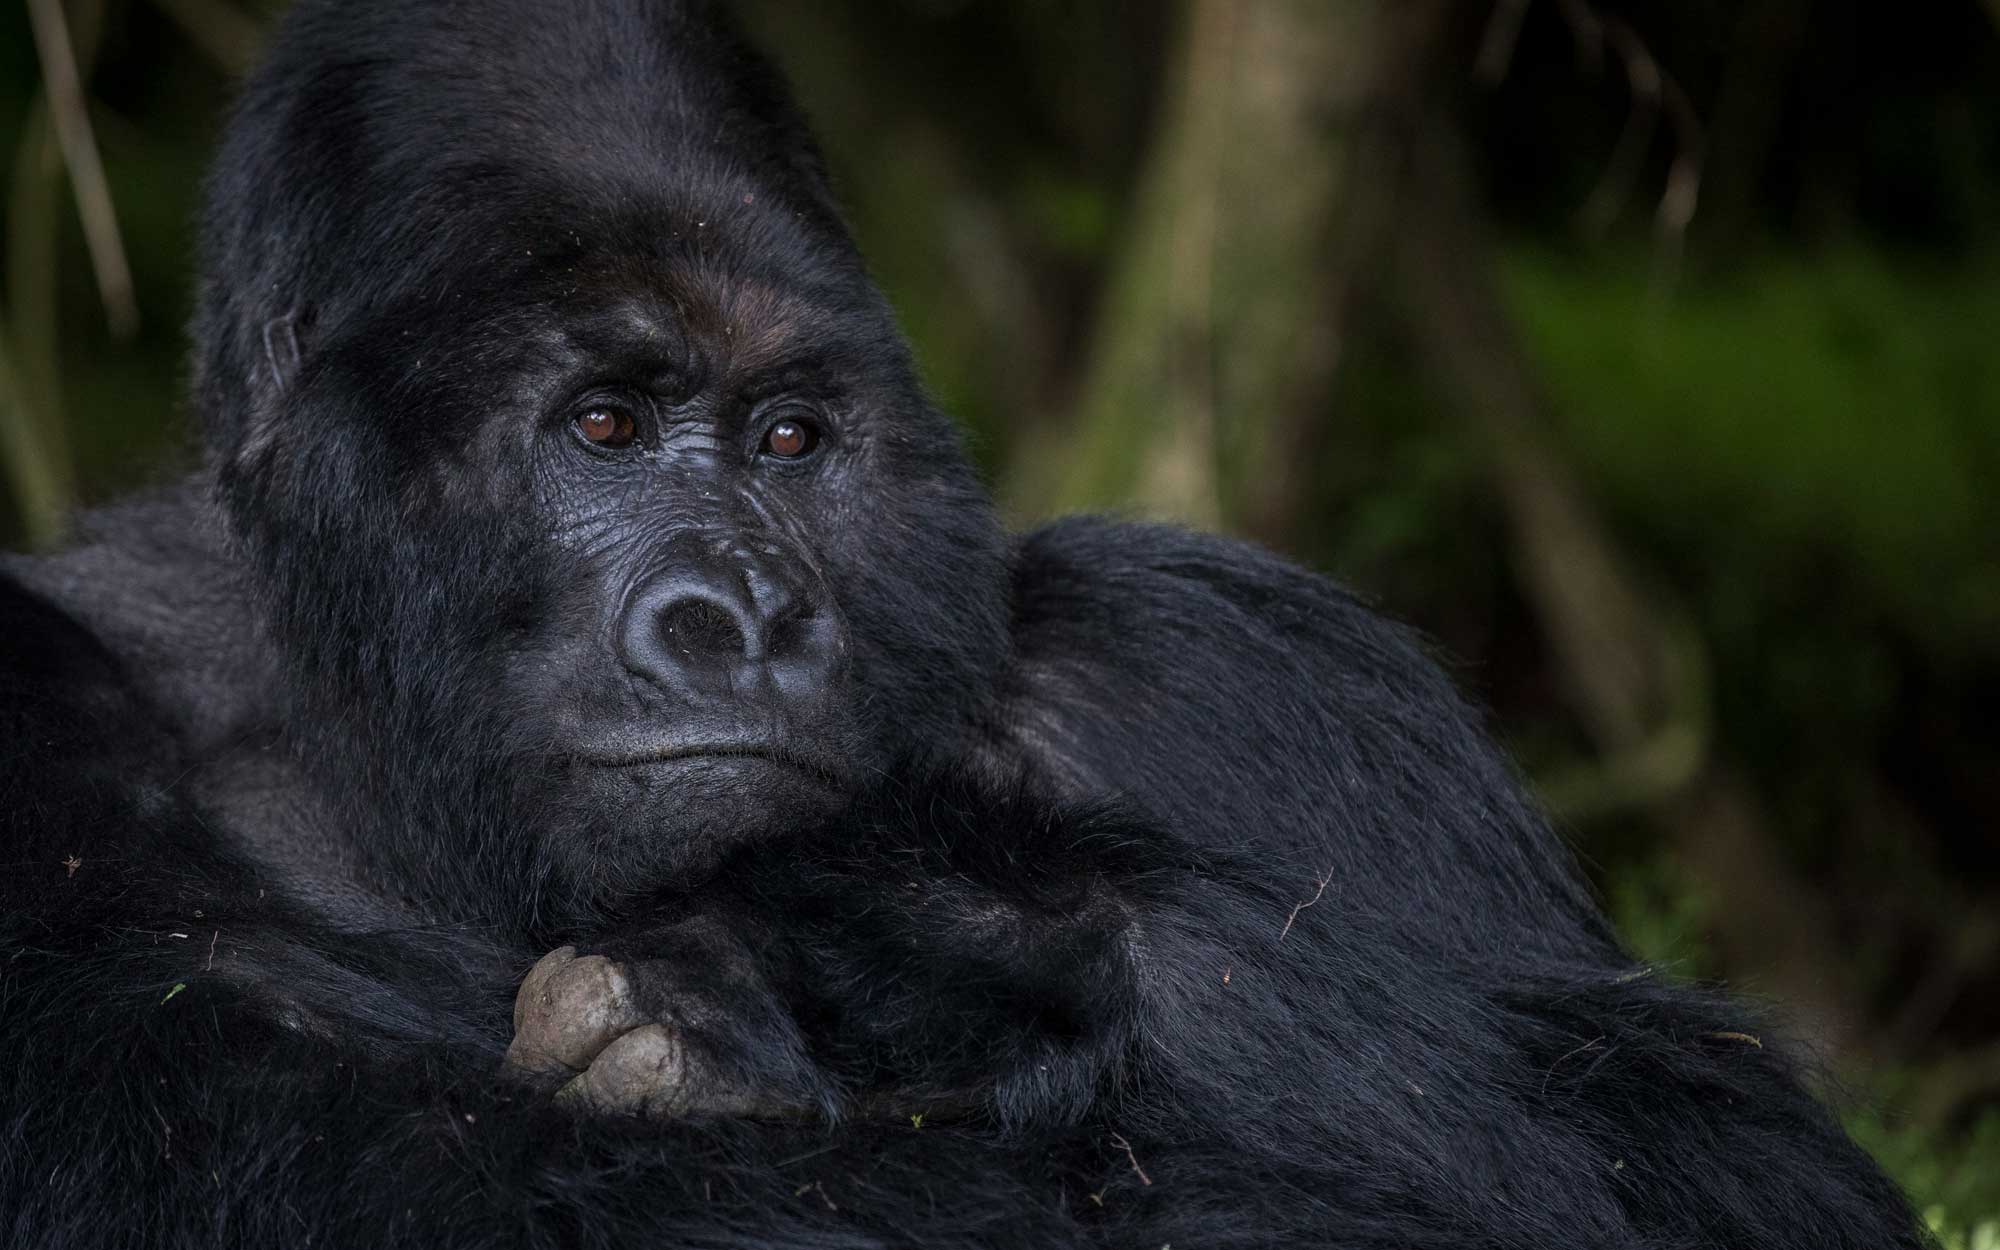 Gorilla Spotting 101: How to See Mountain Gorillas in Their Natural Habitat